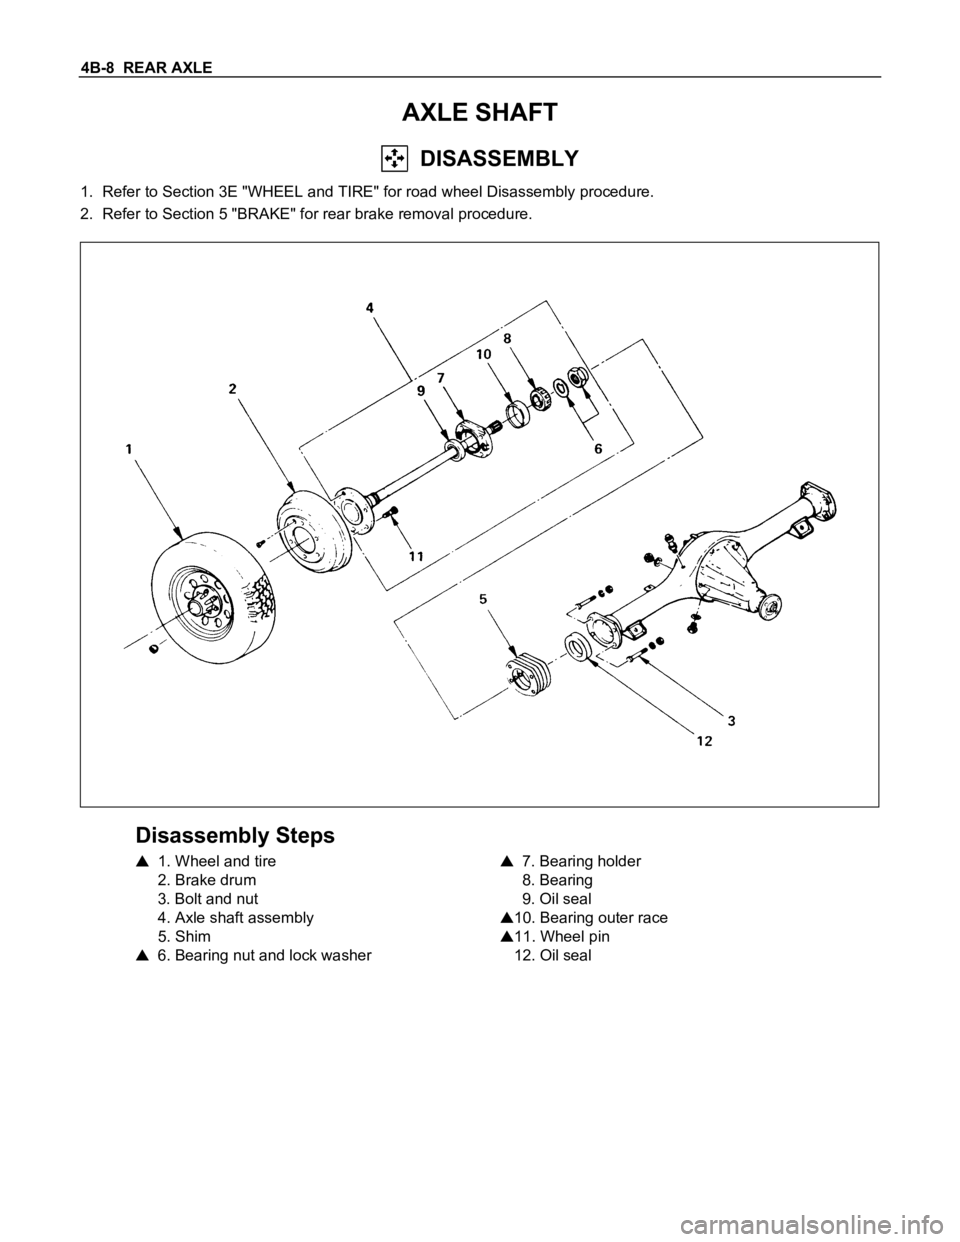 ISUZU TFS SERIES 1997  Workshop Manual 4B-8  REAR AXLE
AXLE SHAFT
  DISASSEMBLY
1. Refer to Section 3E "WHEEL and TIRE" for road wheel Disassembly procedure.
2. Refer to Section 5 "BRAKE" for rear brake removal procedure.
D